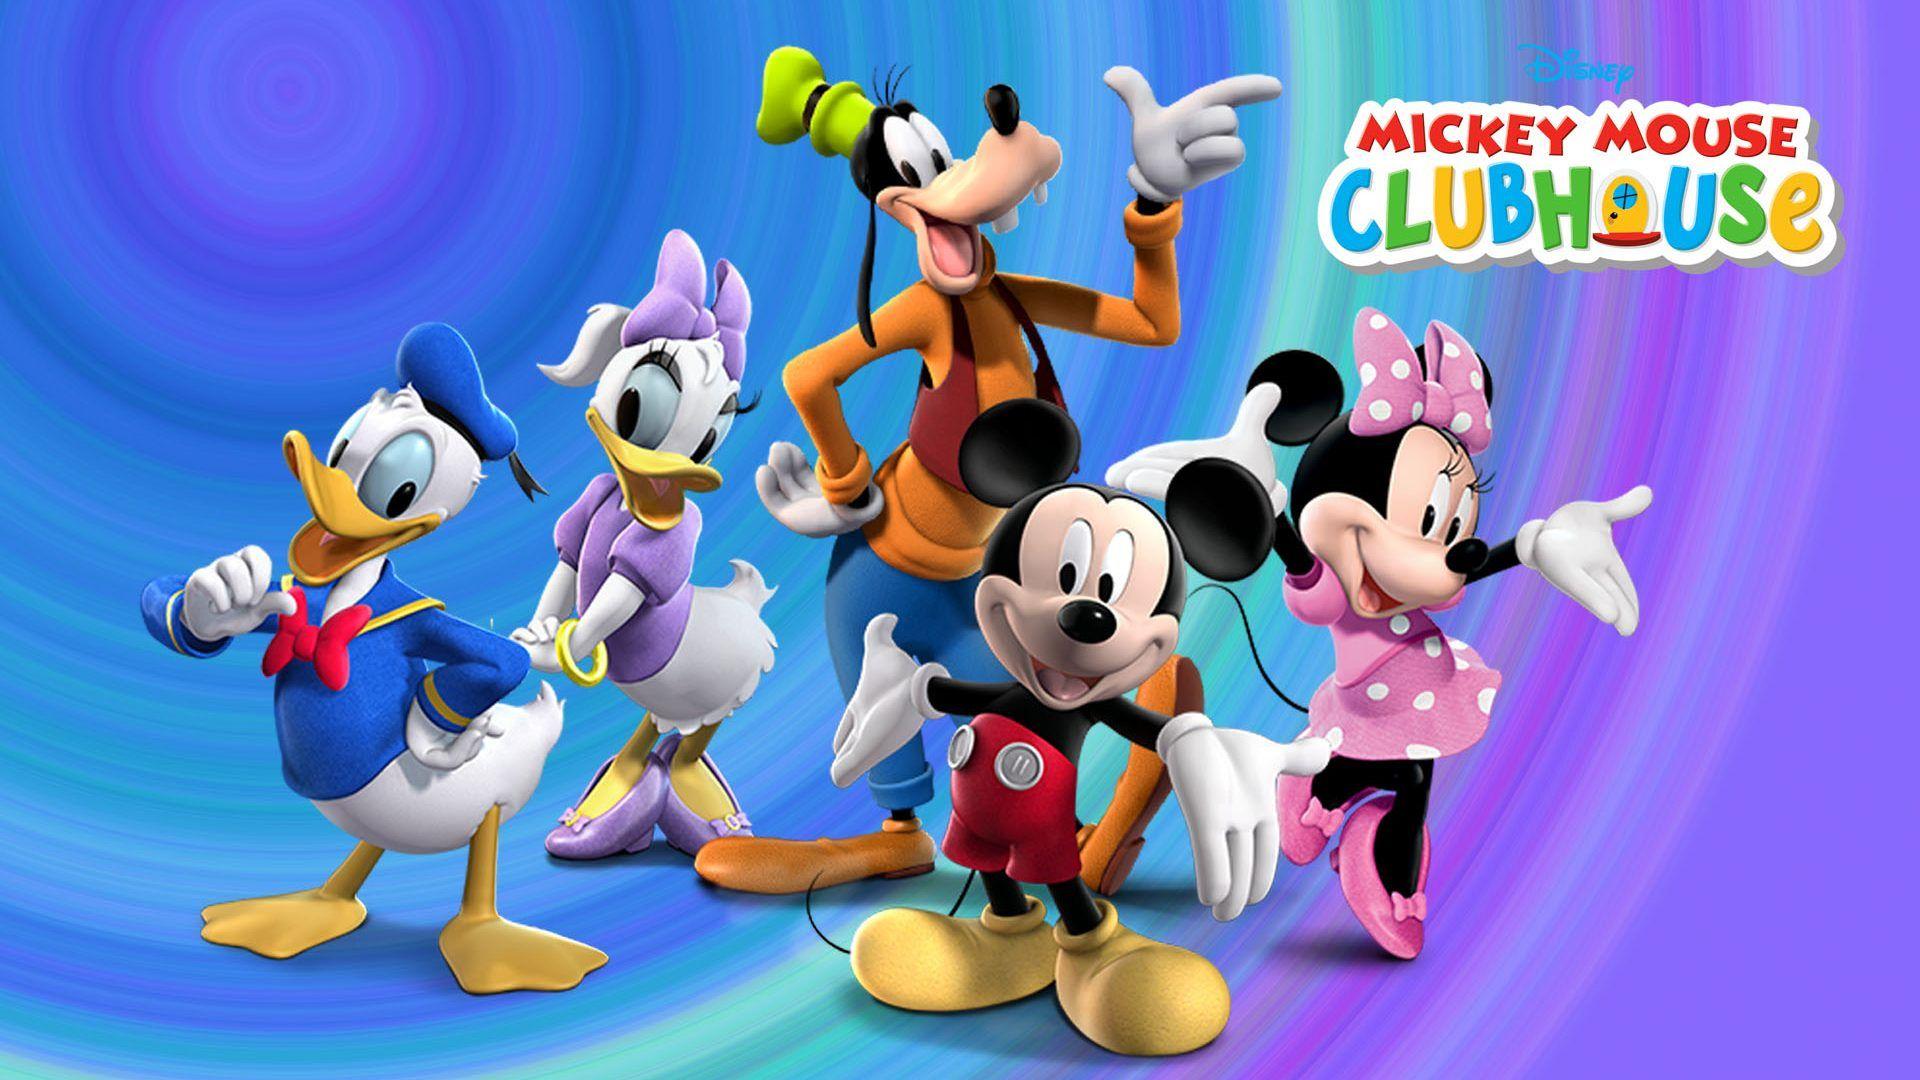 Mickey Mouse Clubhouse Characters Wallpaper Hd Android Cartoons Wallpaper  Mickey Background Clubhouse  फट शयर